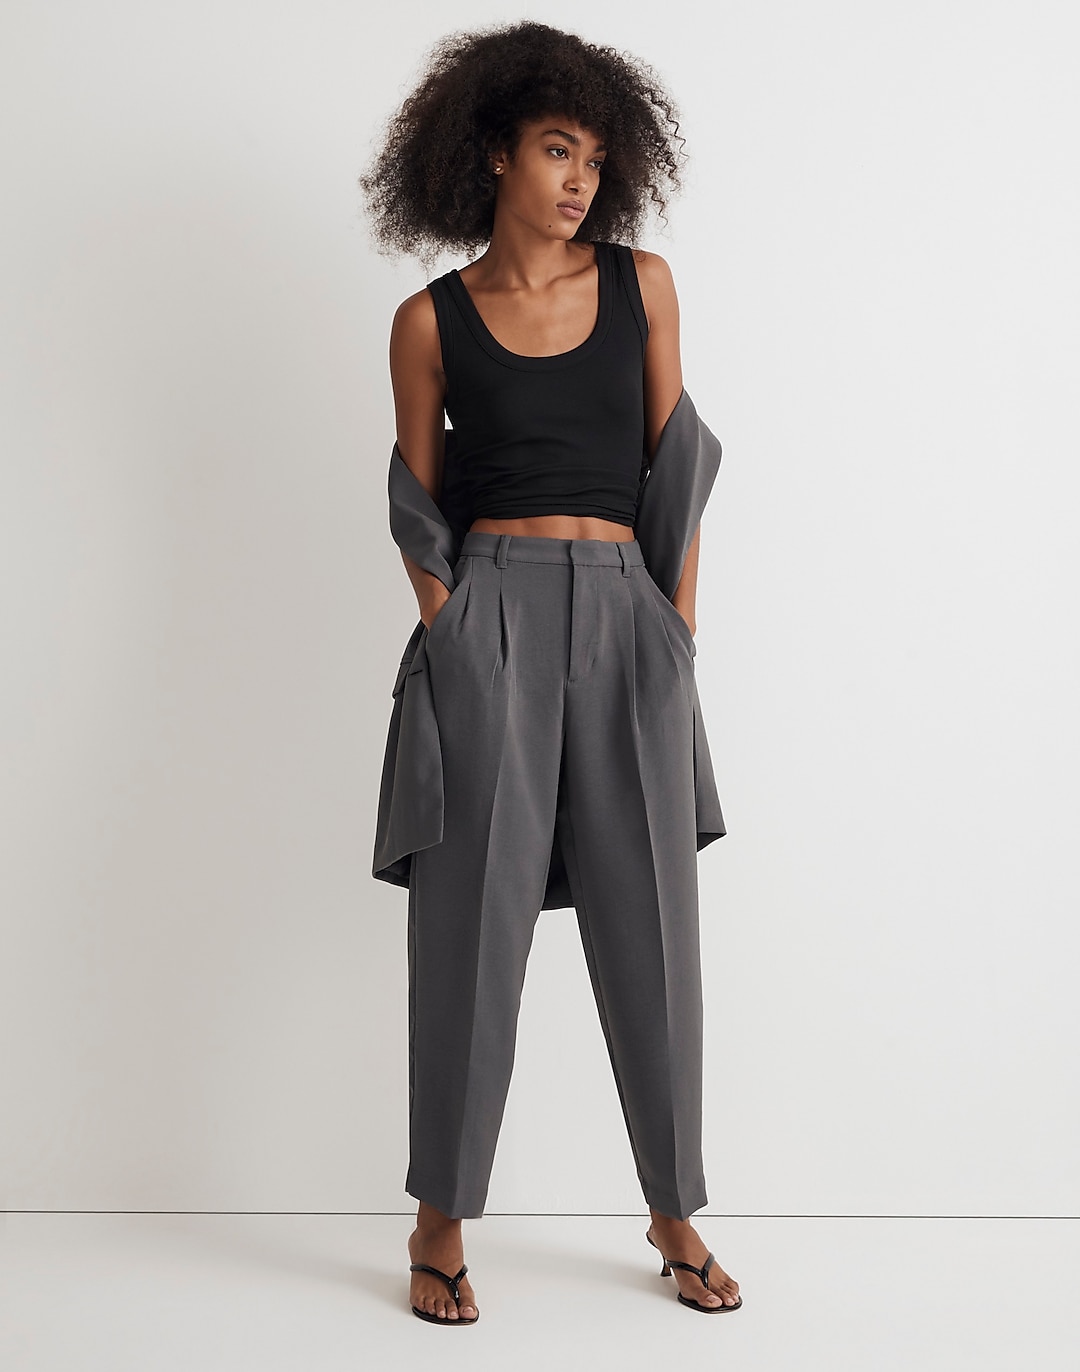 Pleat Don't Go High-Waisted Tapered Pants  Tapered pants, Tapered trousers,  High waisted